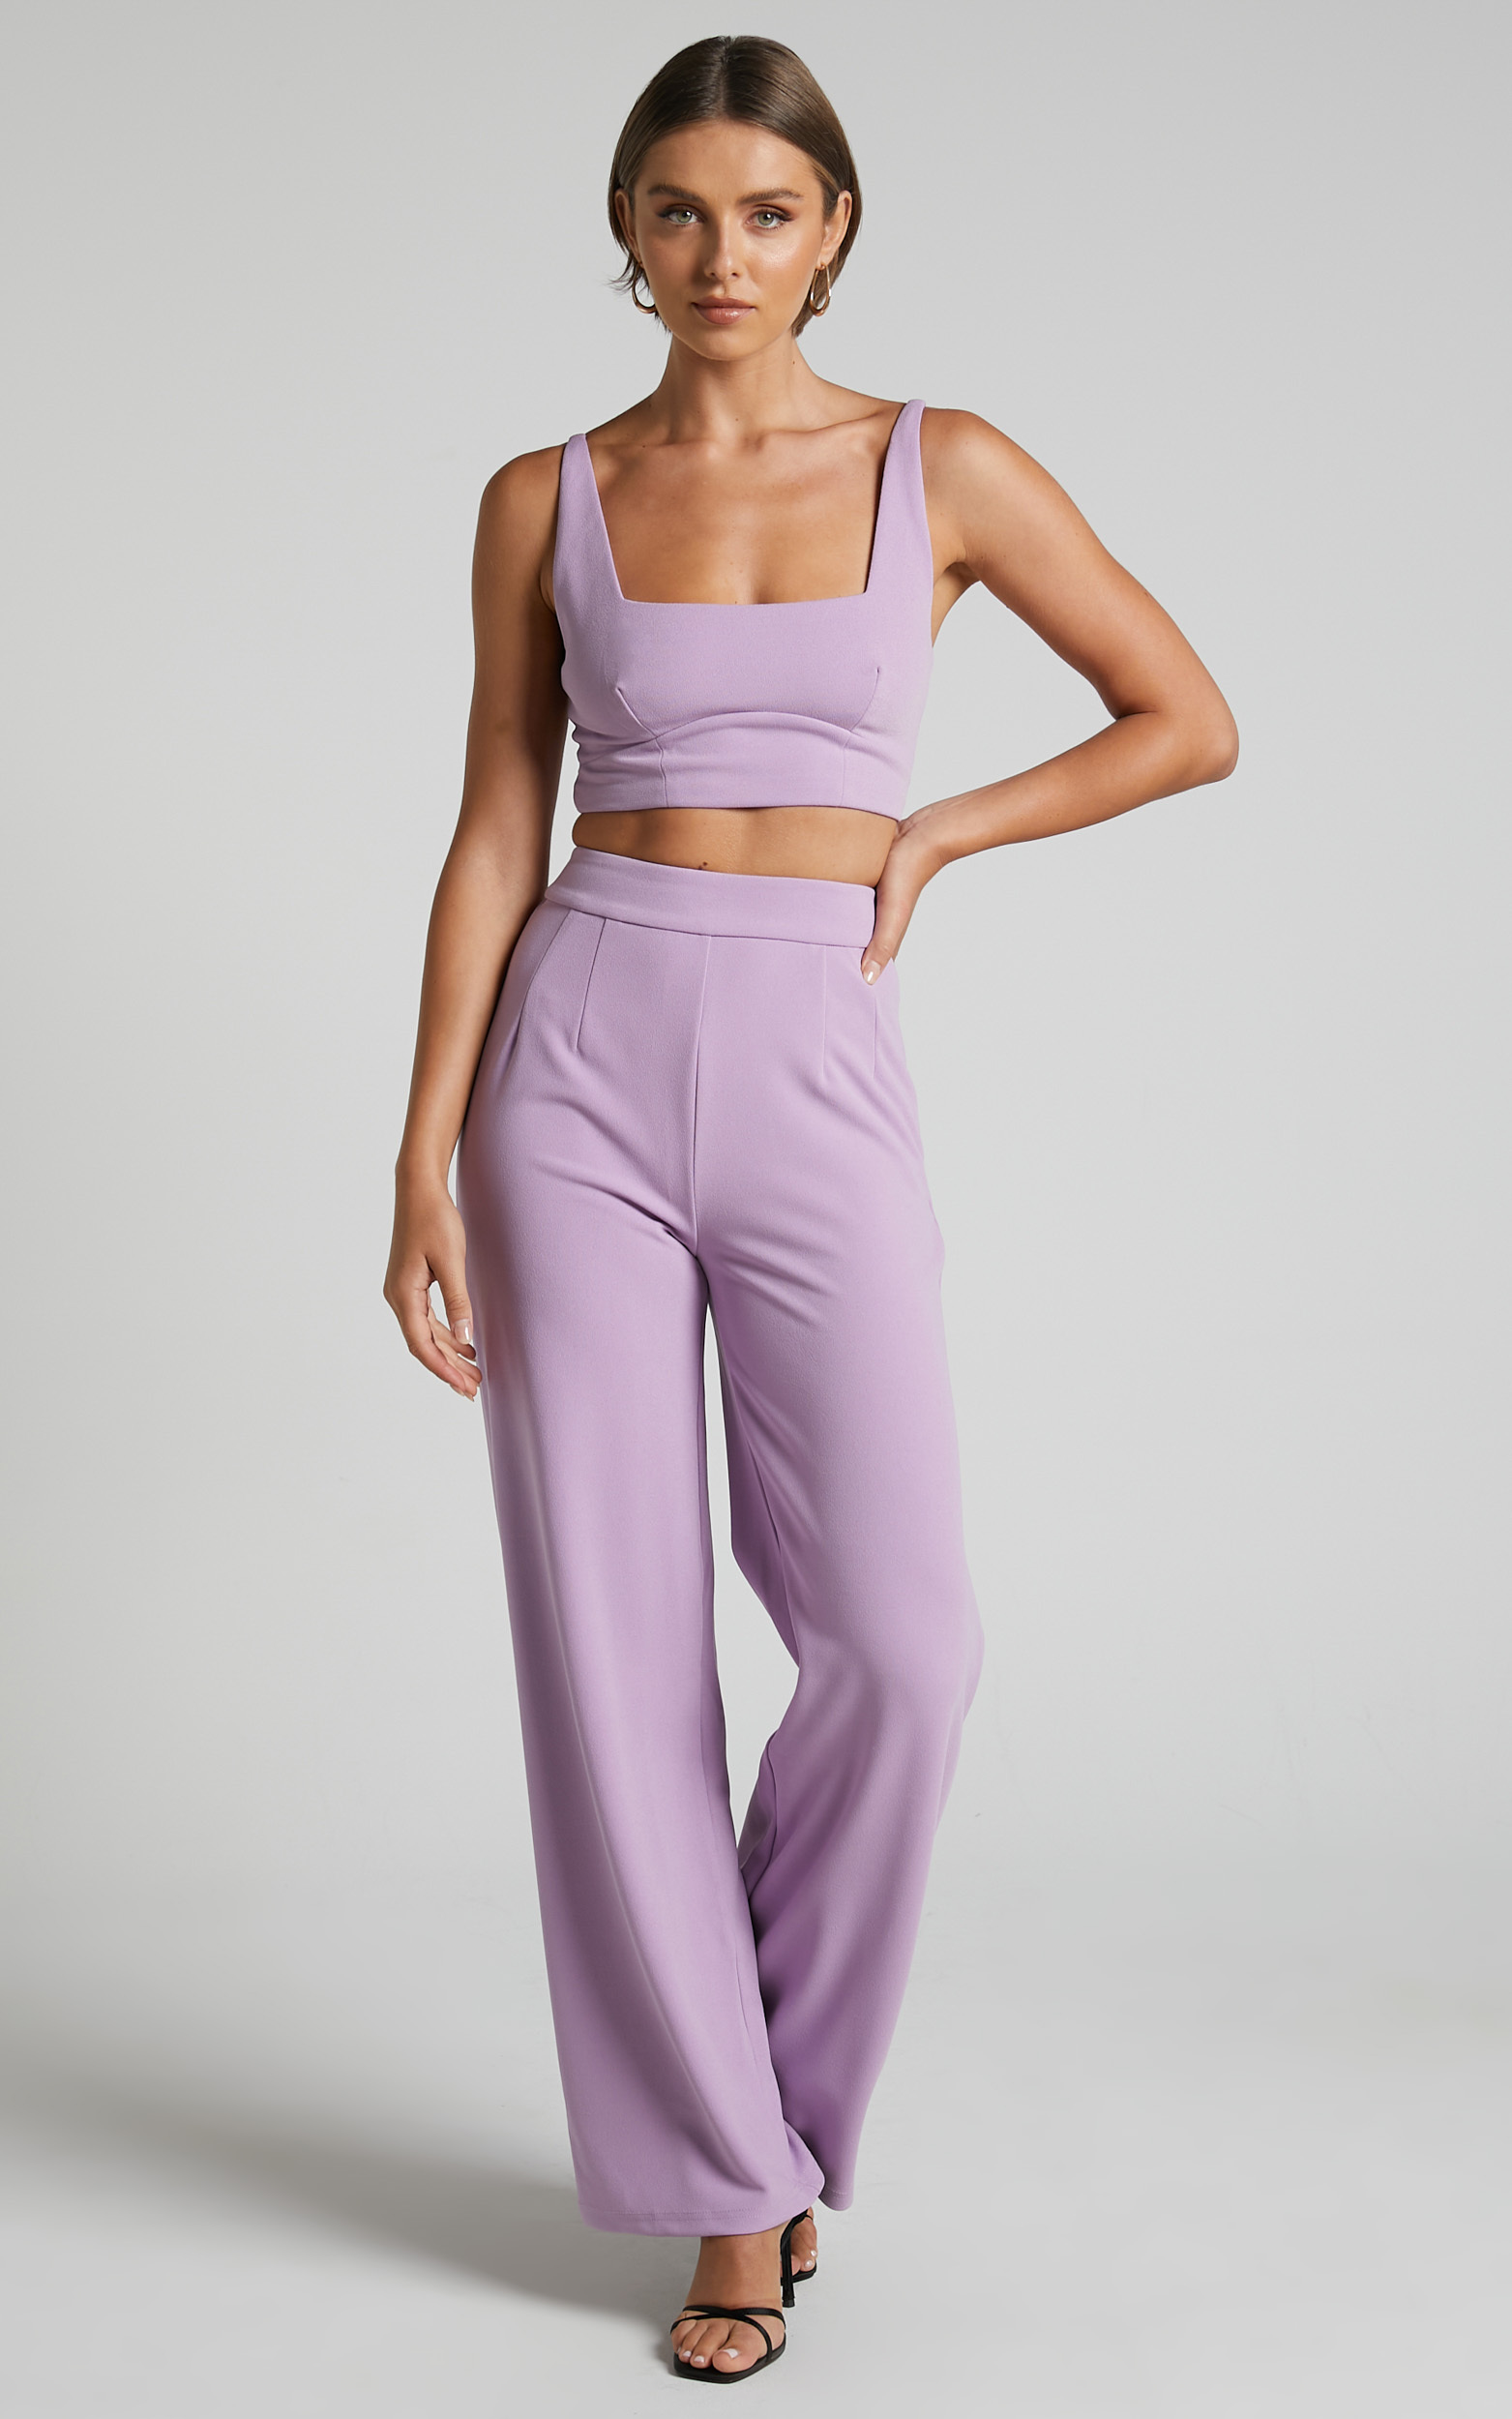 Elibeth Two Piece Set  Crop Top and High Waisted Wide Leg Pants in Lilac   Showpo USA